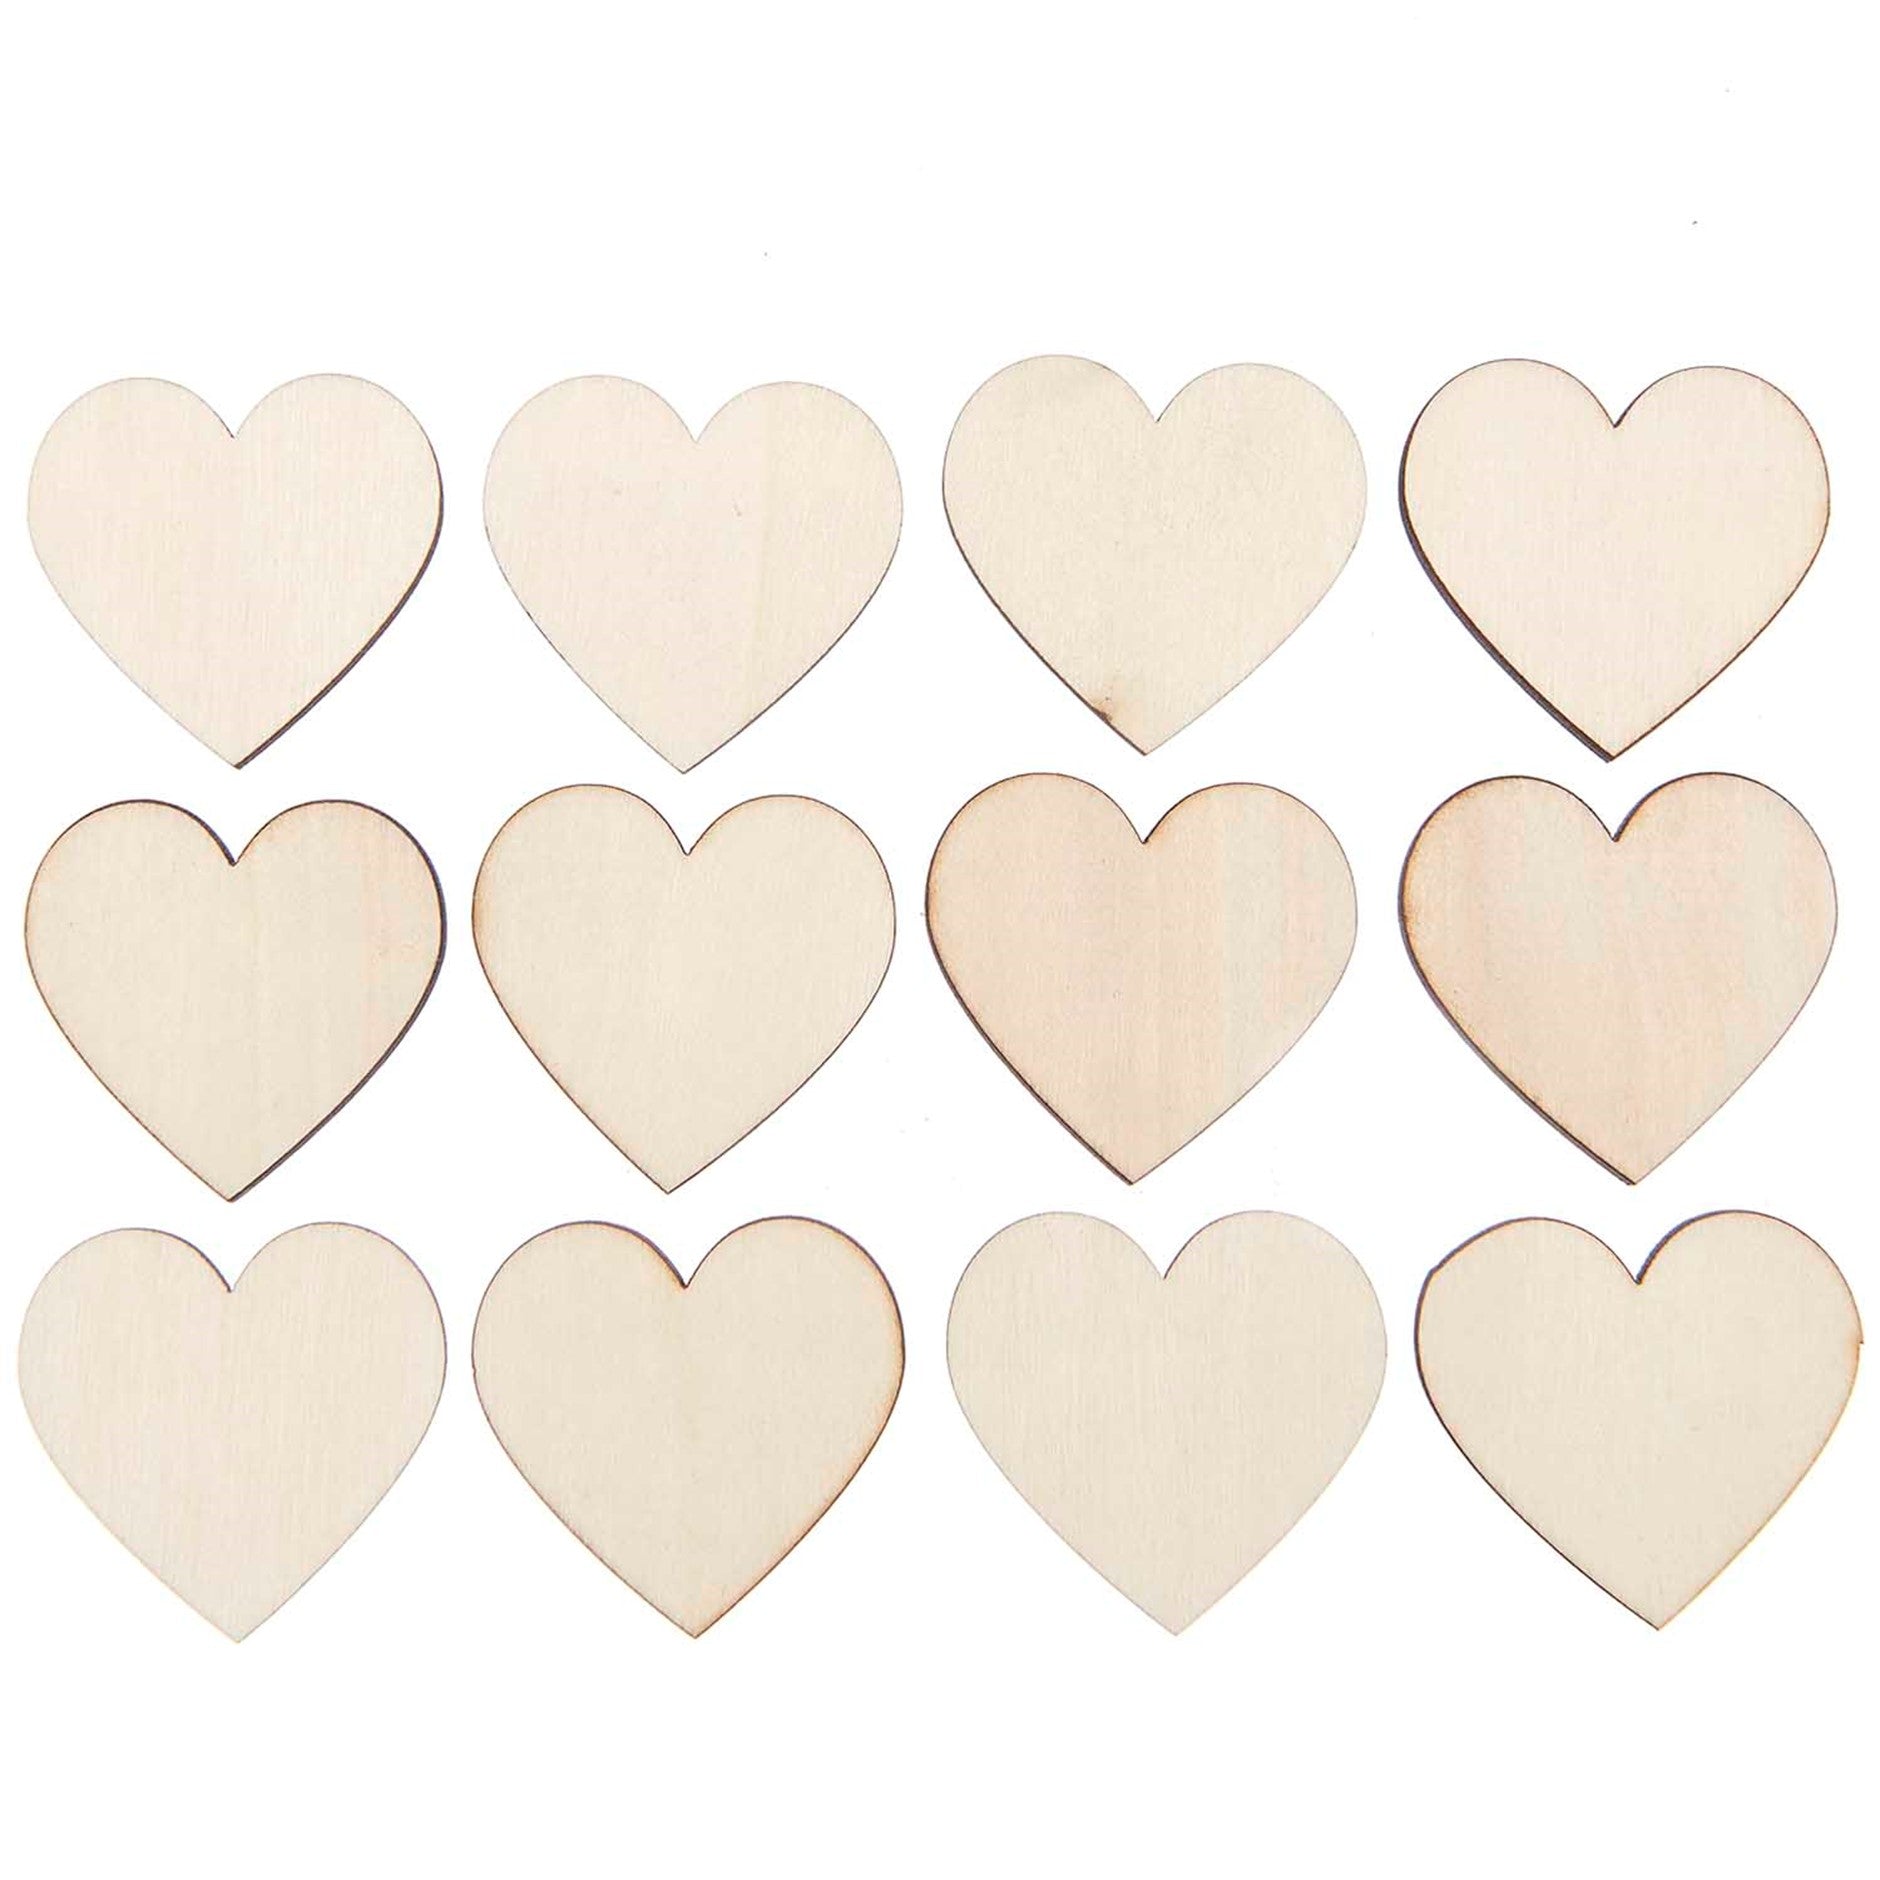 Wooden Hearts Large - 12pc